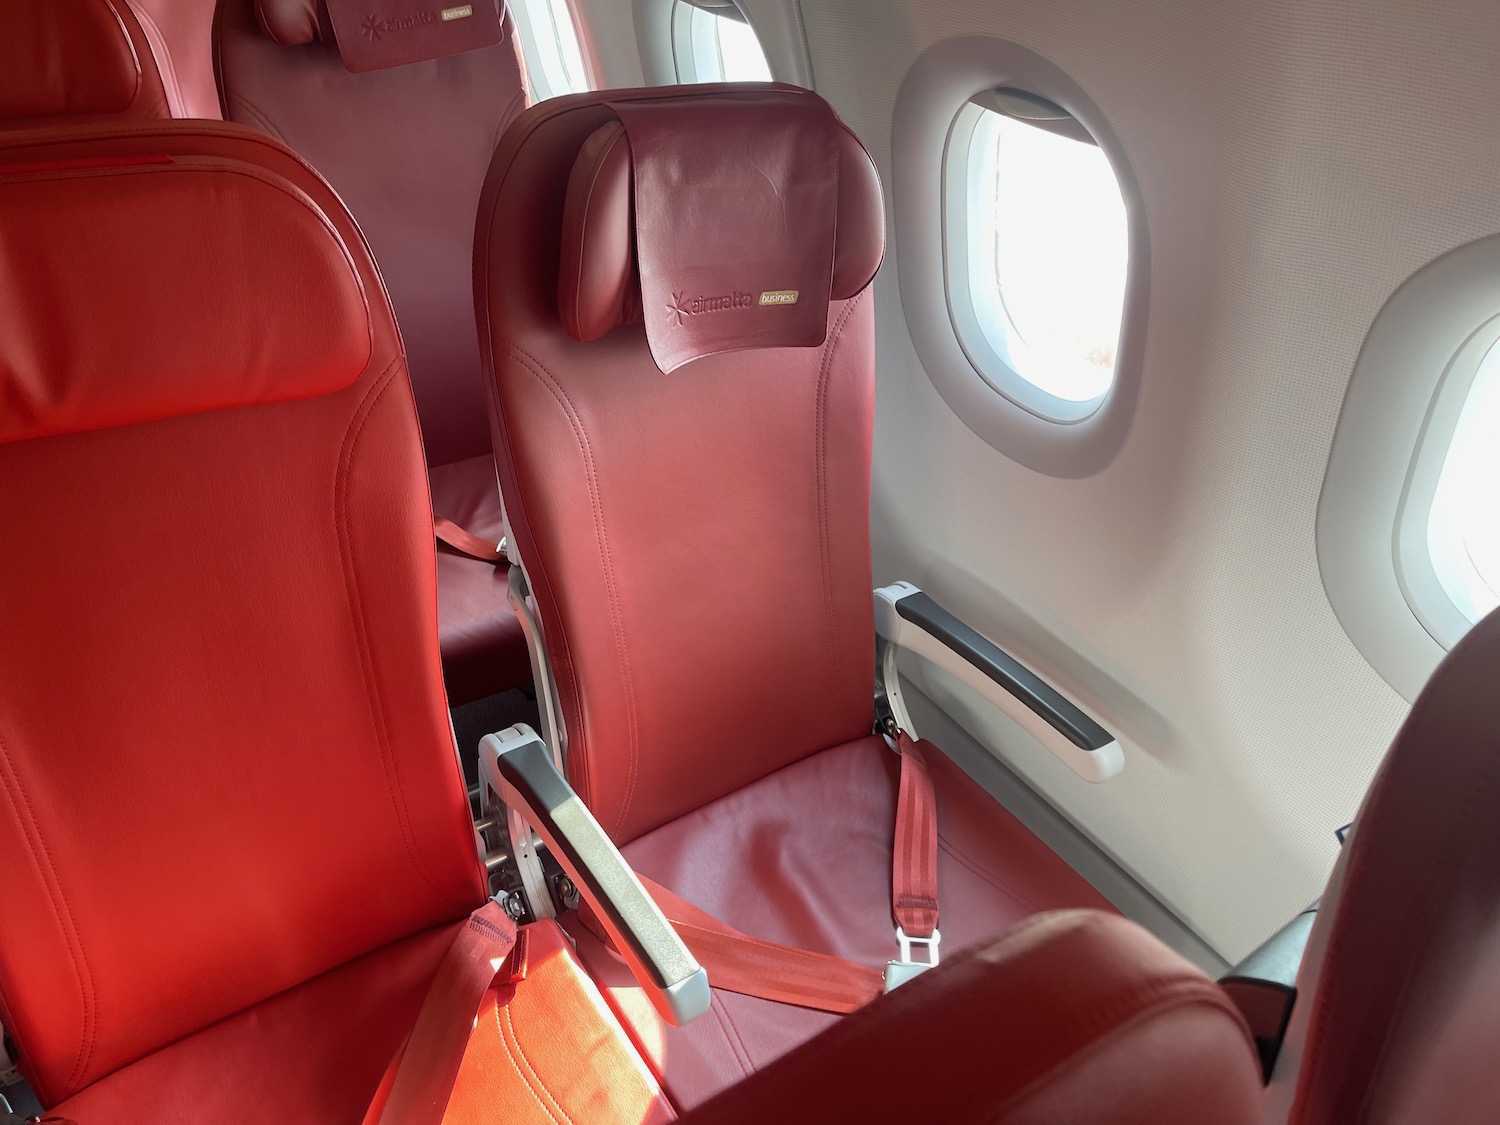 a red seats in an airplane